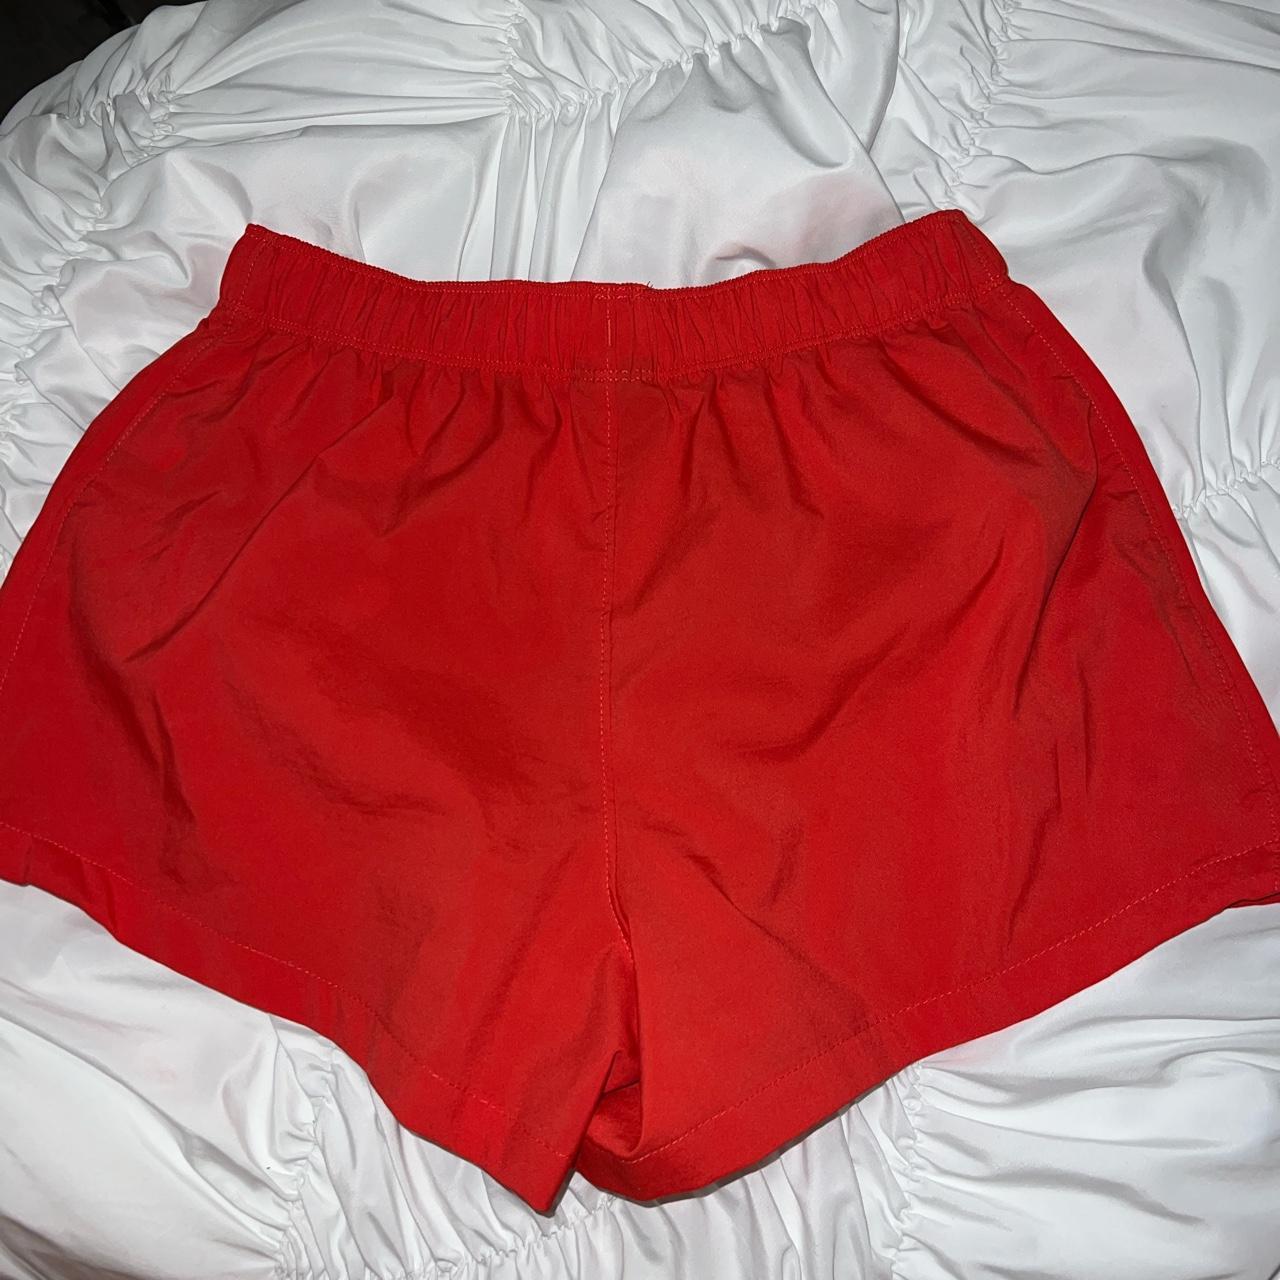 The North Face Women's Red Shorts (2)